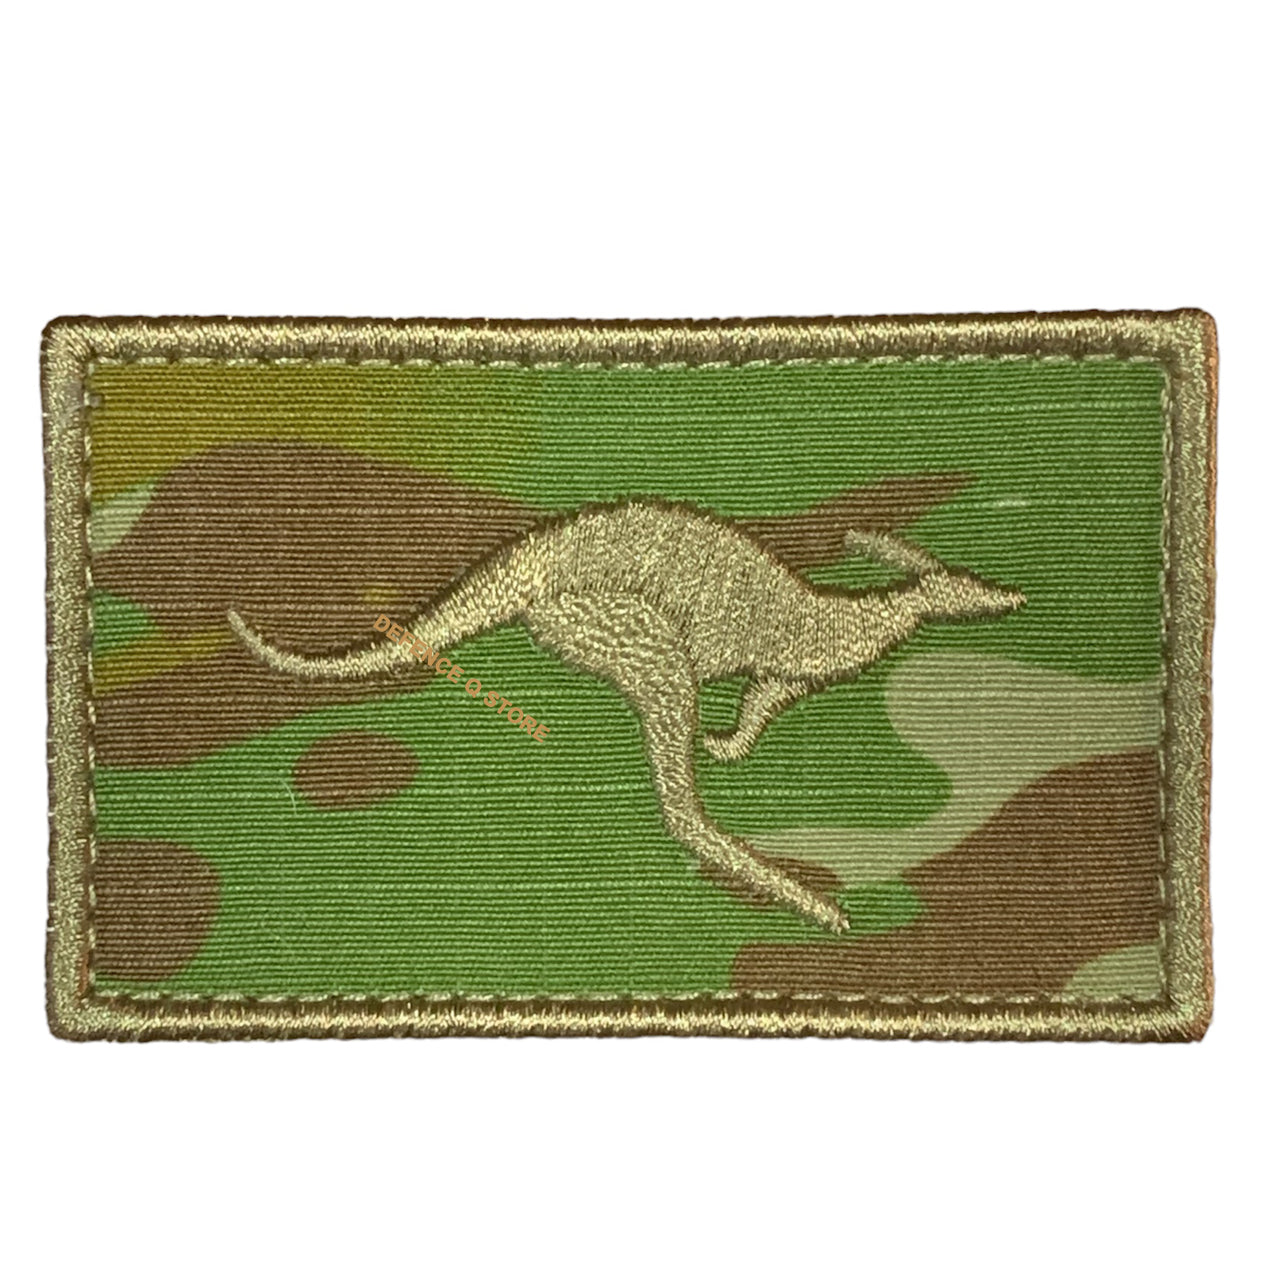 Enhance your outfit with the AMC Subdued Kangaroo Green Embroidery Velcro Backed Patch. Measuring 5cm X 8cm, it adds a charming touch to your jacket, pack, or cap. Display your patriotic spirit in a stylish and compelling manner! www.defenceqstore.com.au